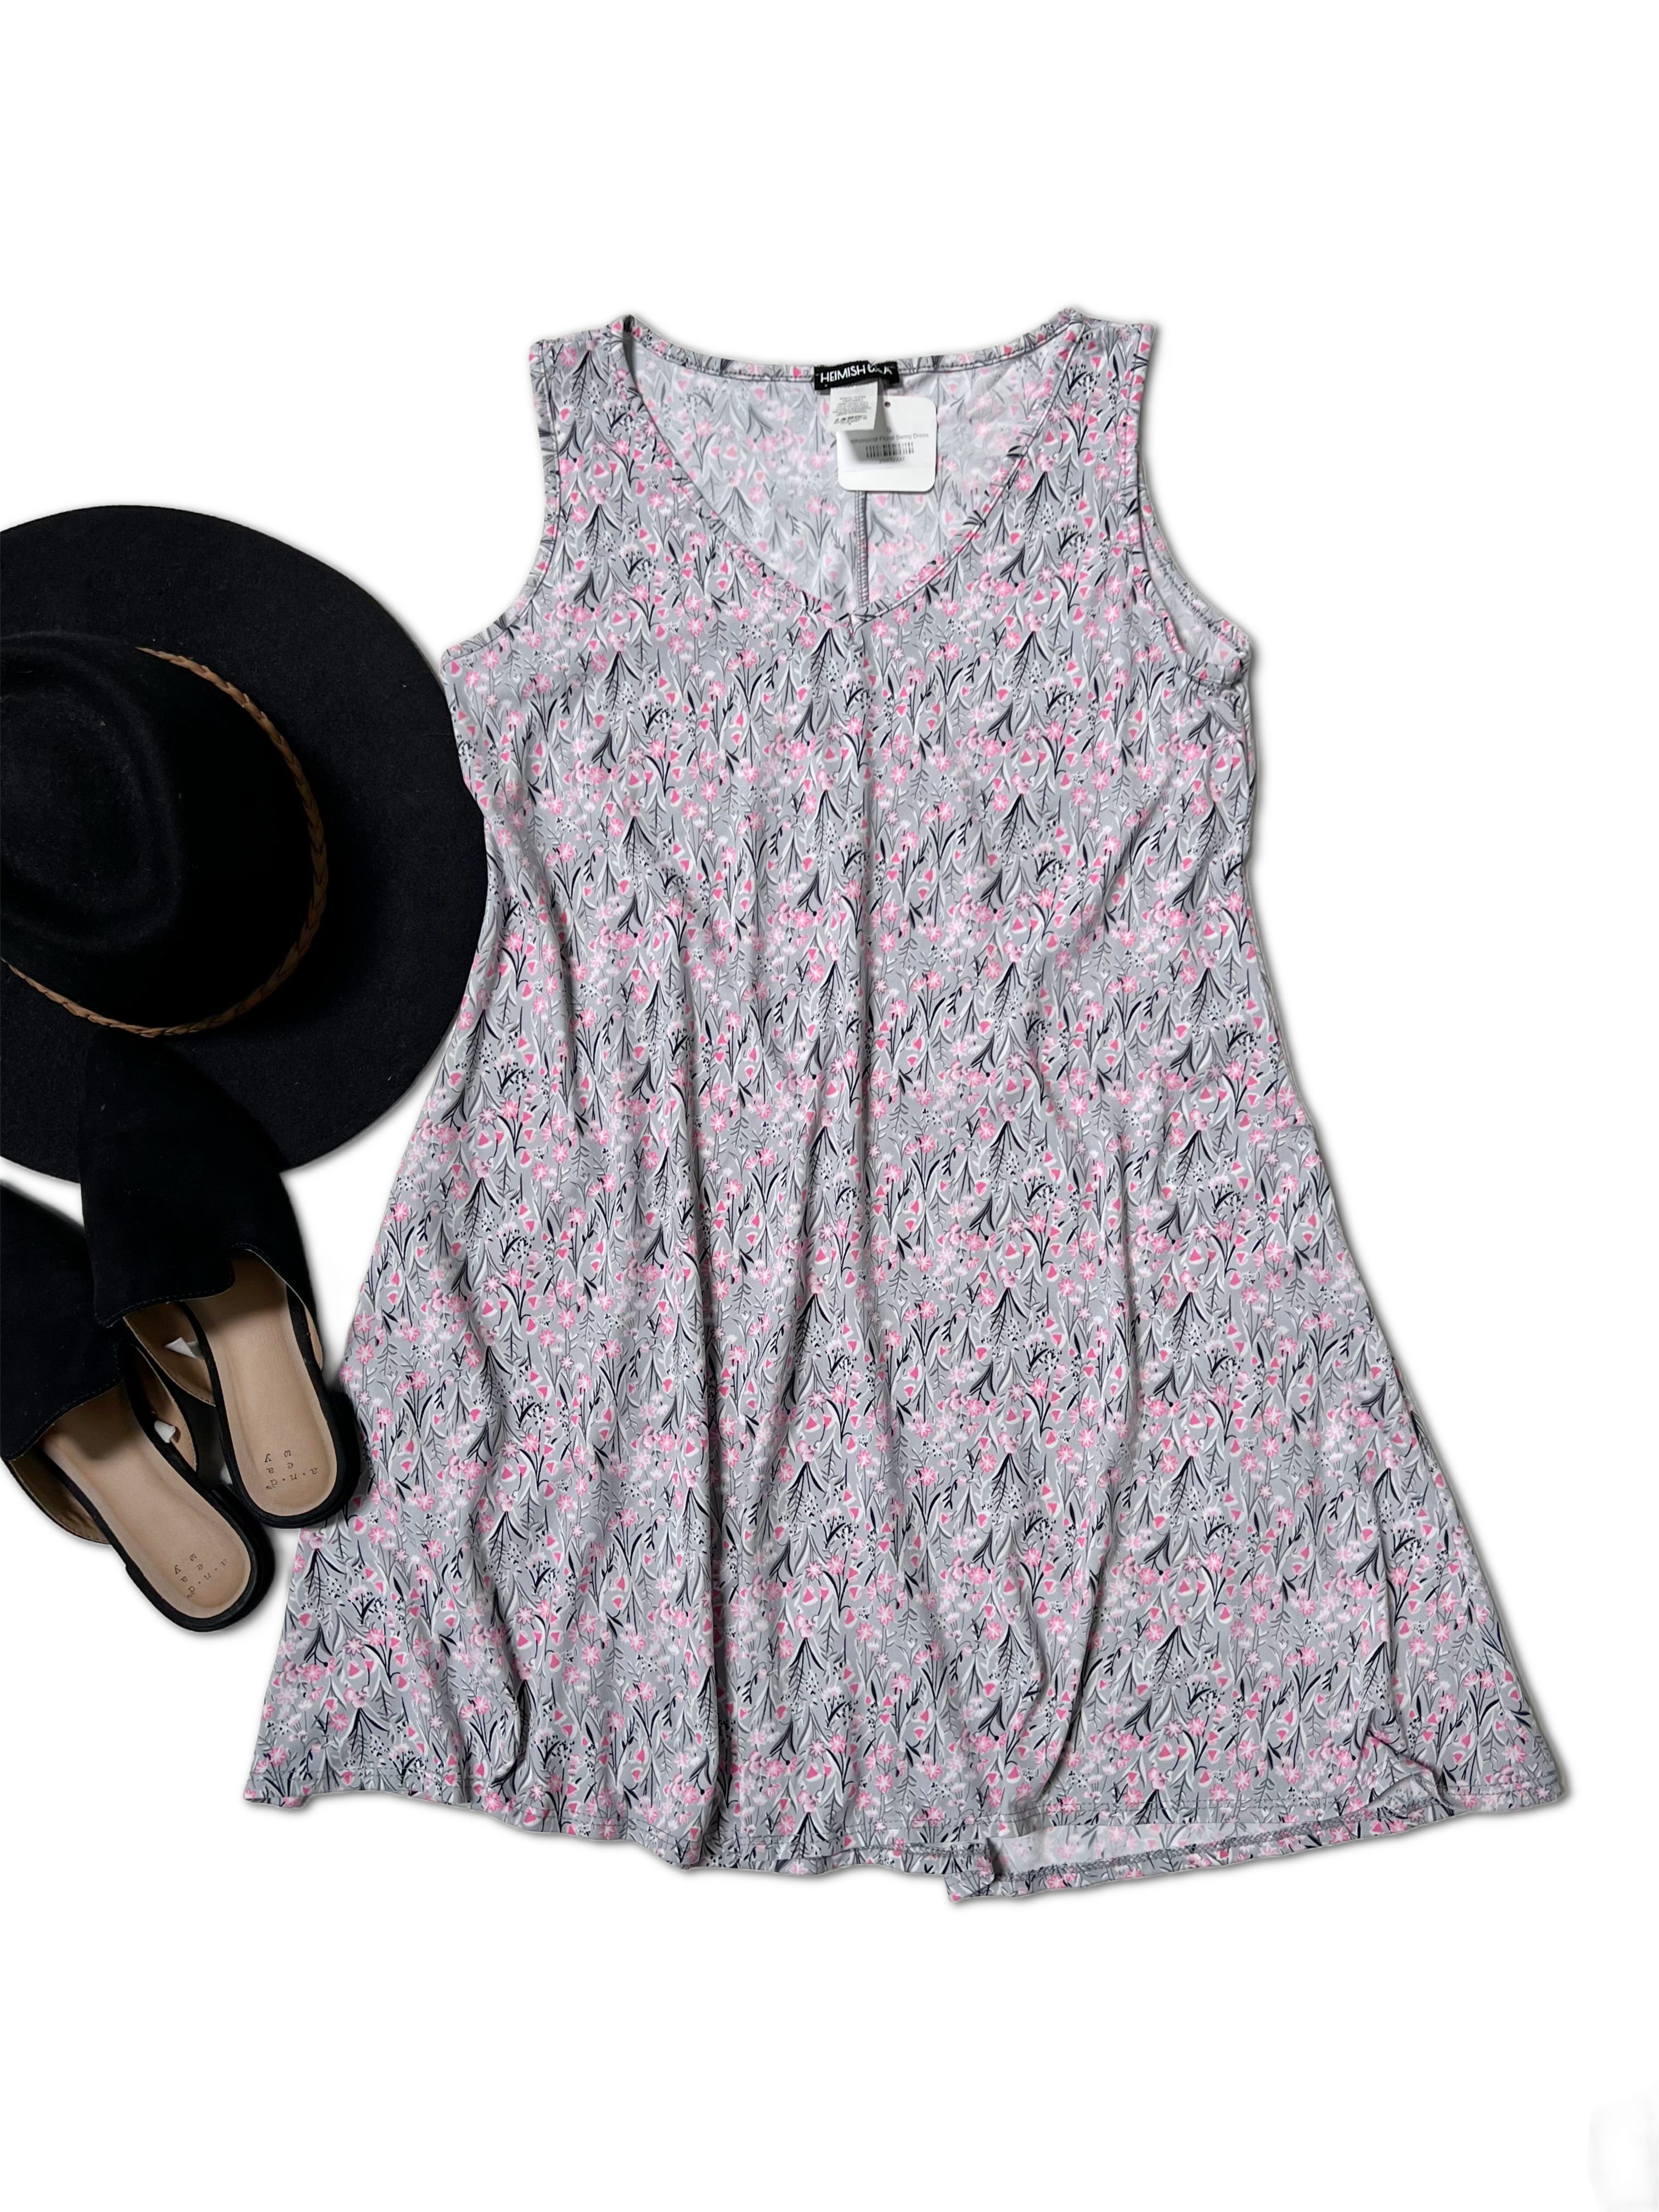 Whimsical Floral Swing Dress